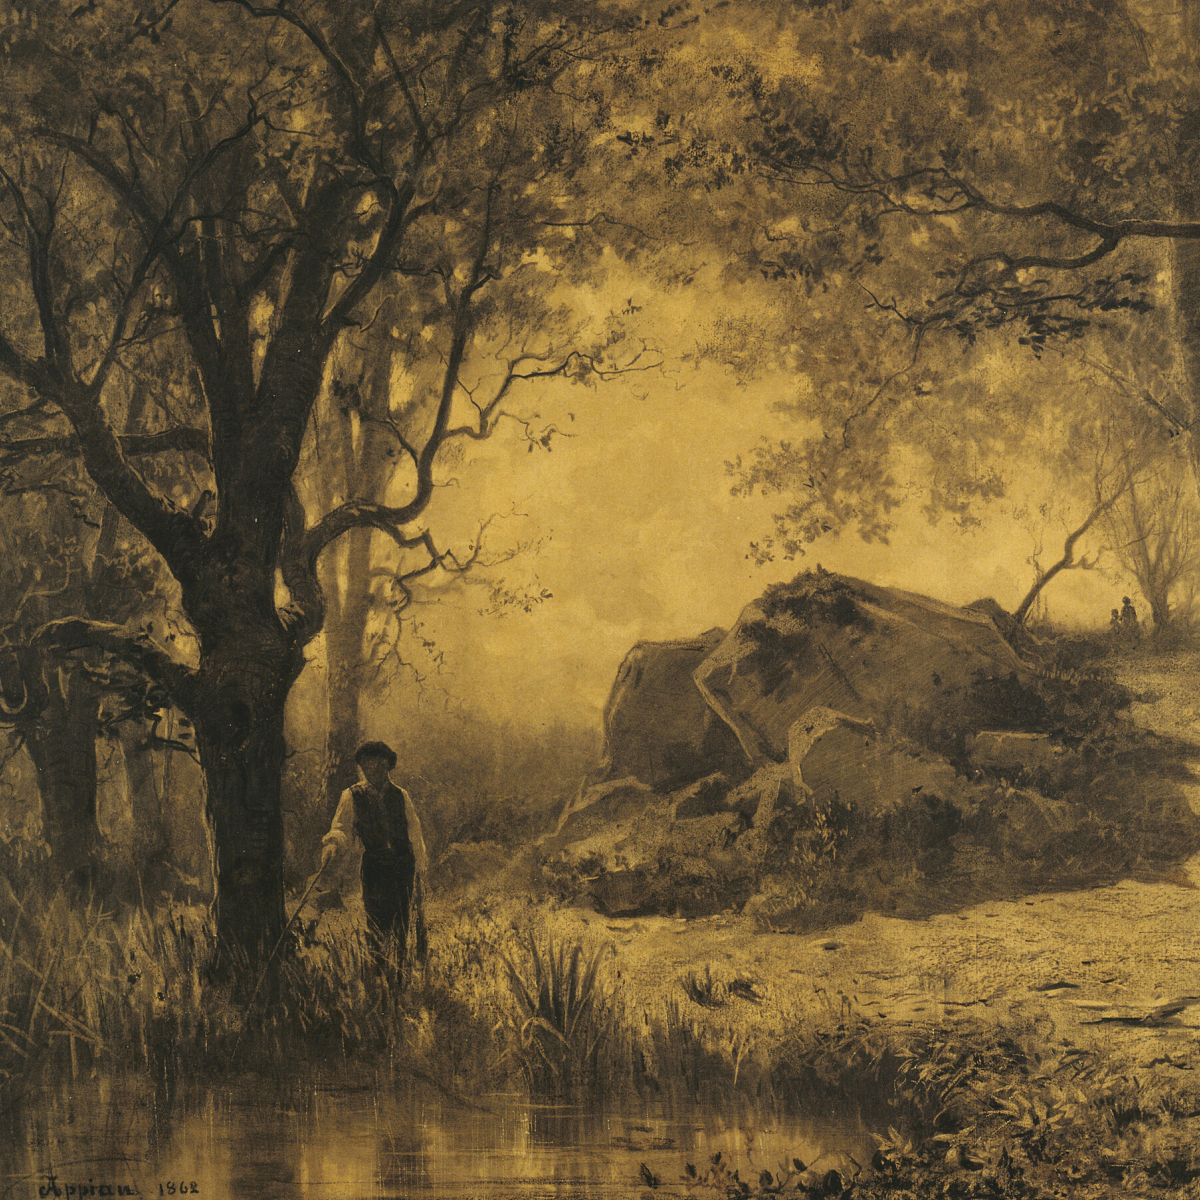 Pond at the Edge of the Wood by Adolphe Appian